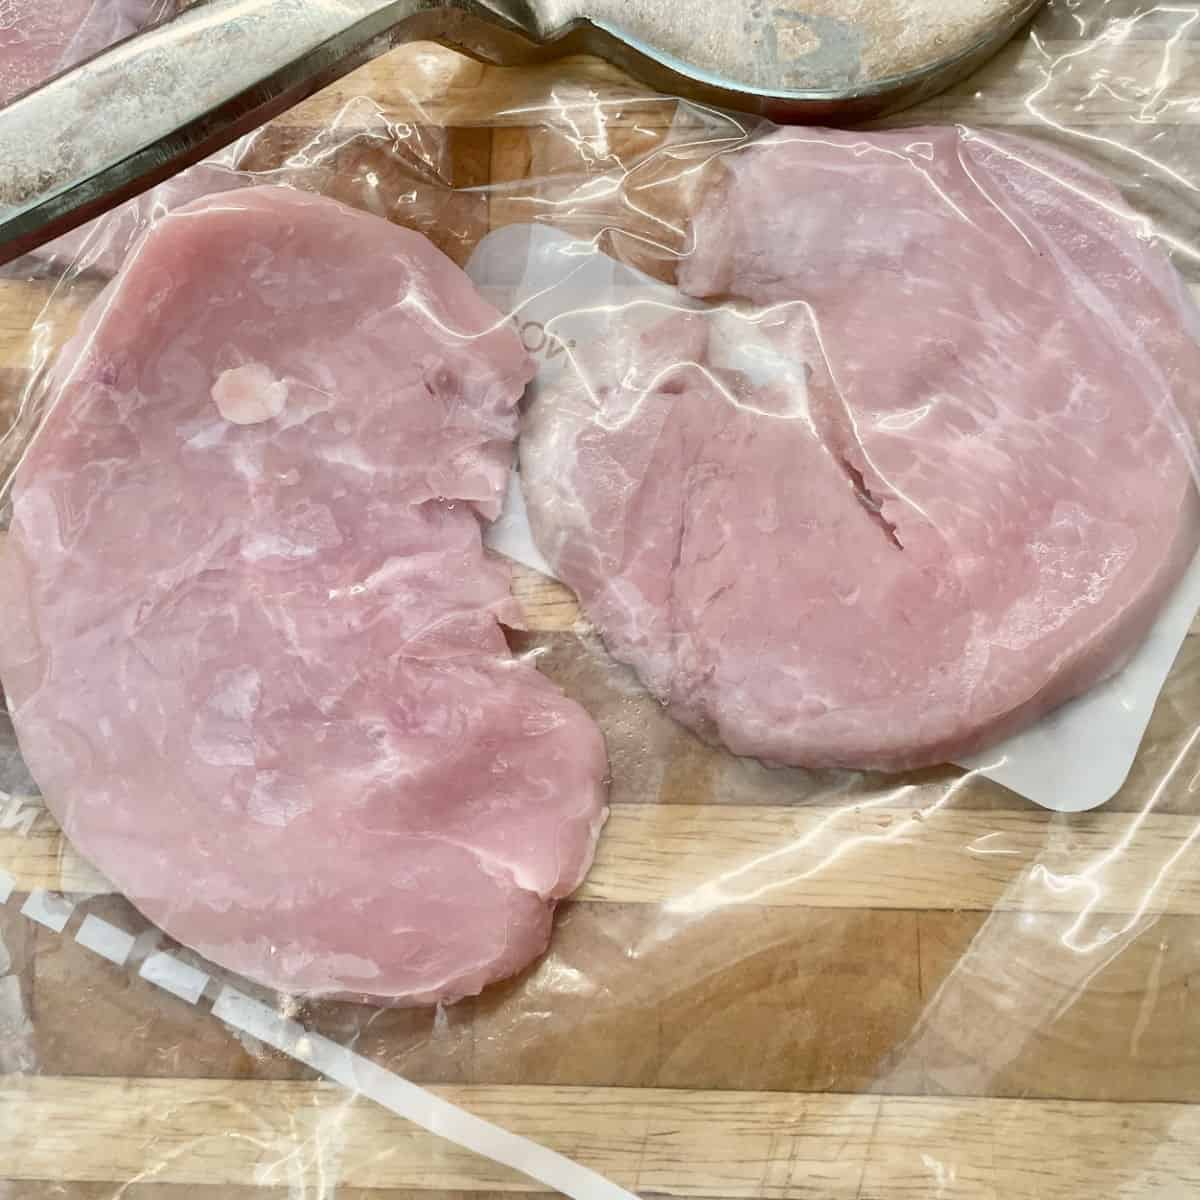 Two turkey cutlets in a bag ready to be pounded.